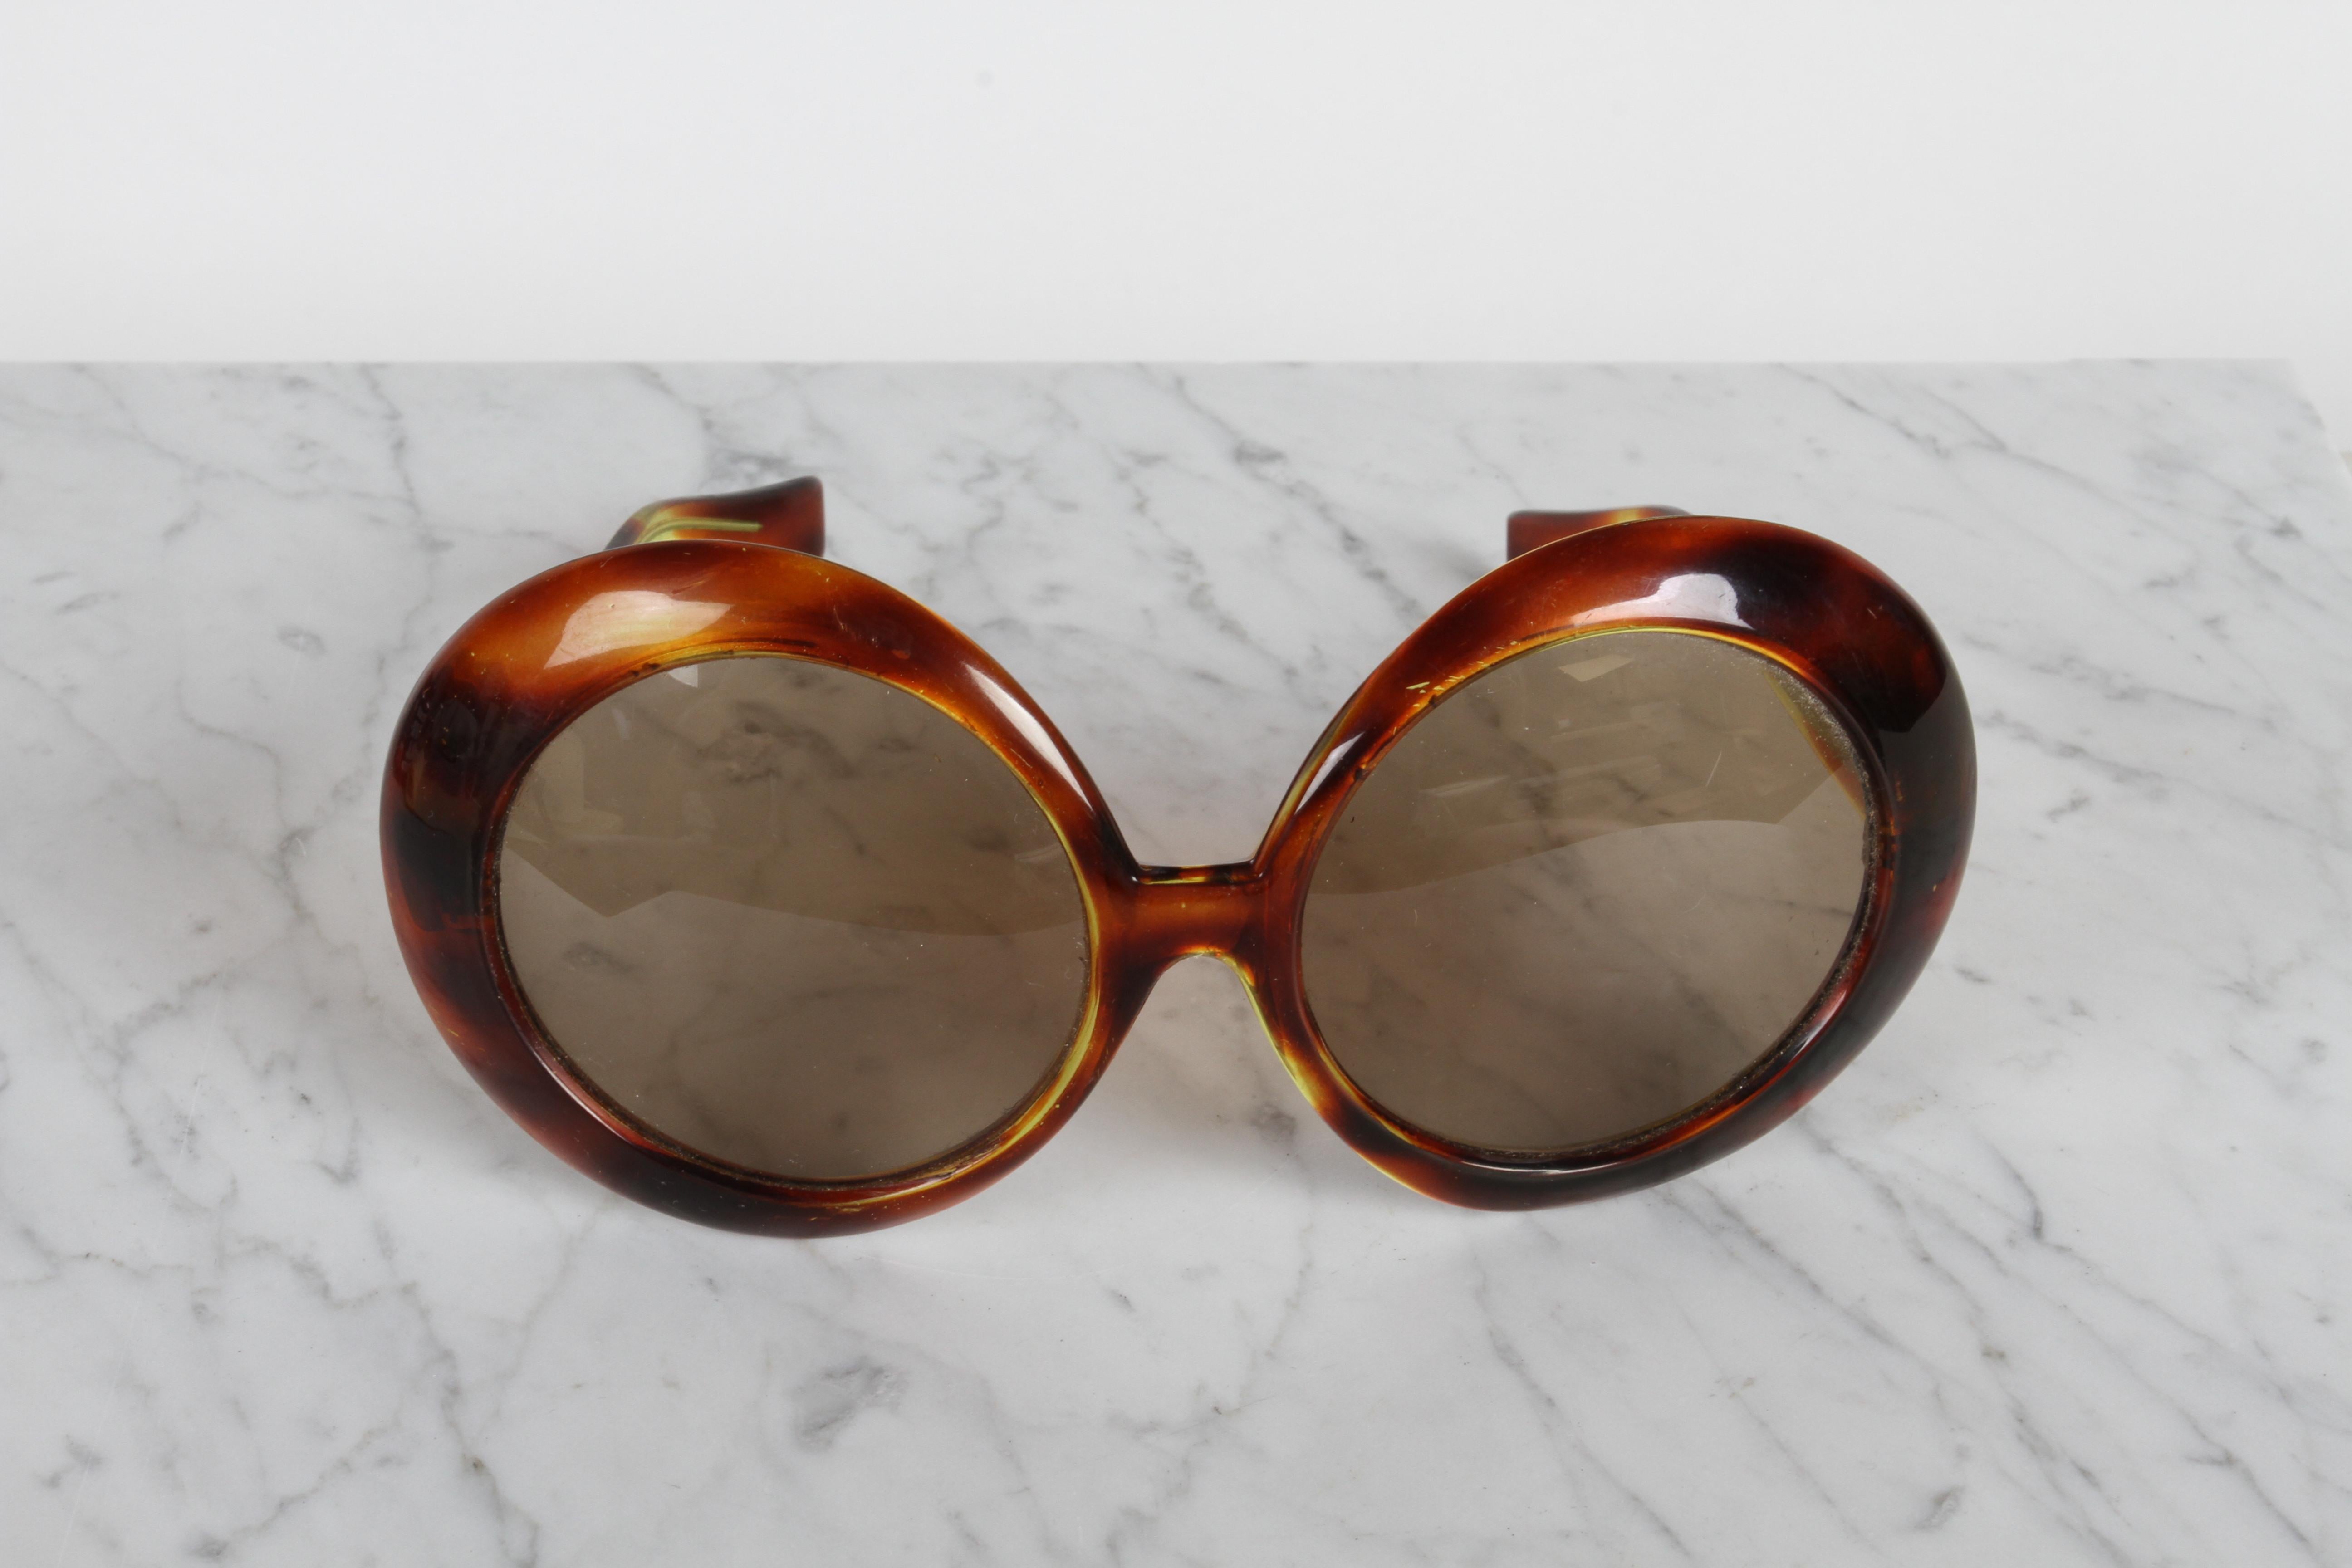 Wonderful circa 1960s women's oversized tortoise frame sunglasses. Marked made in Italy on arm. Inside dims between arms is 5.5/8